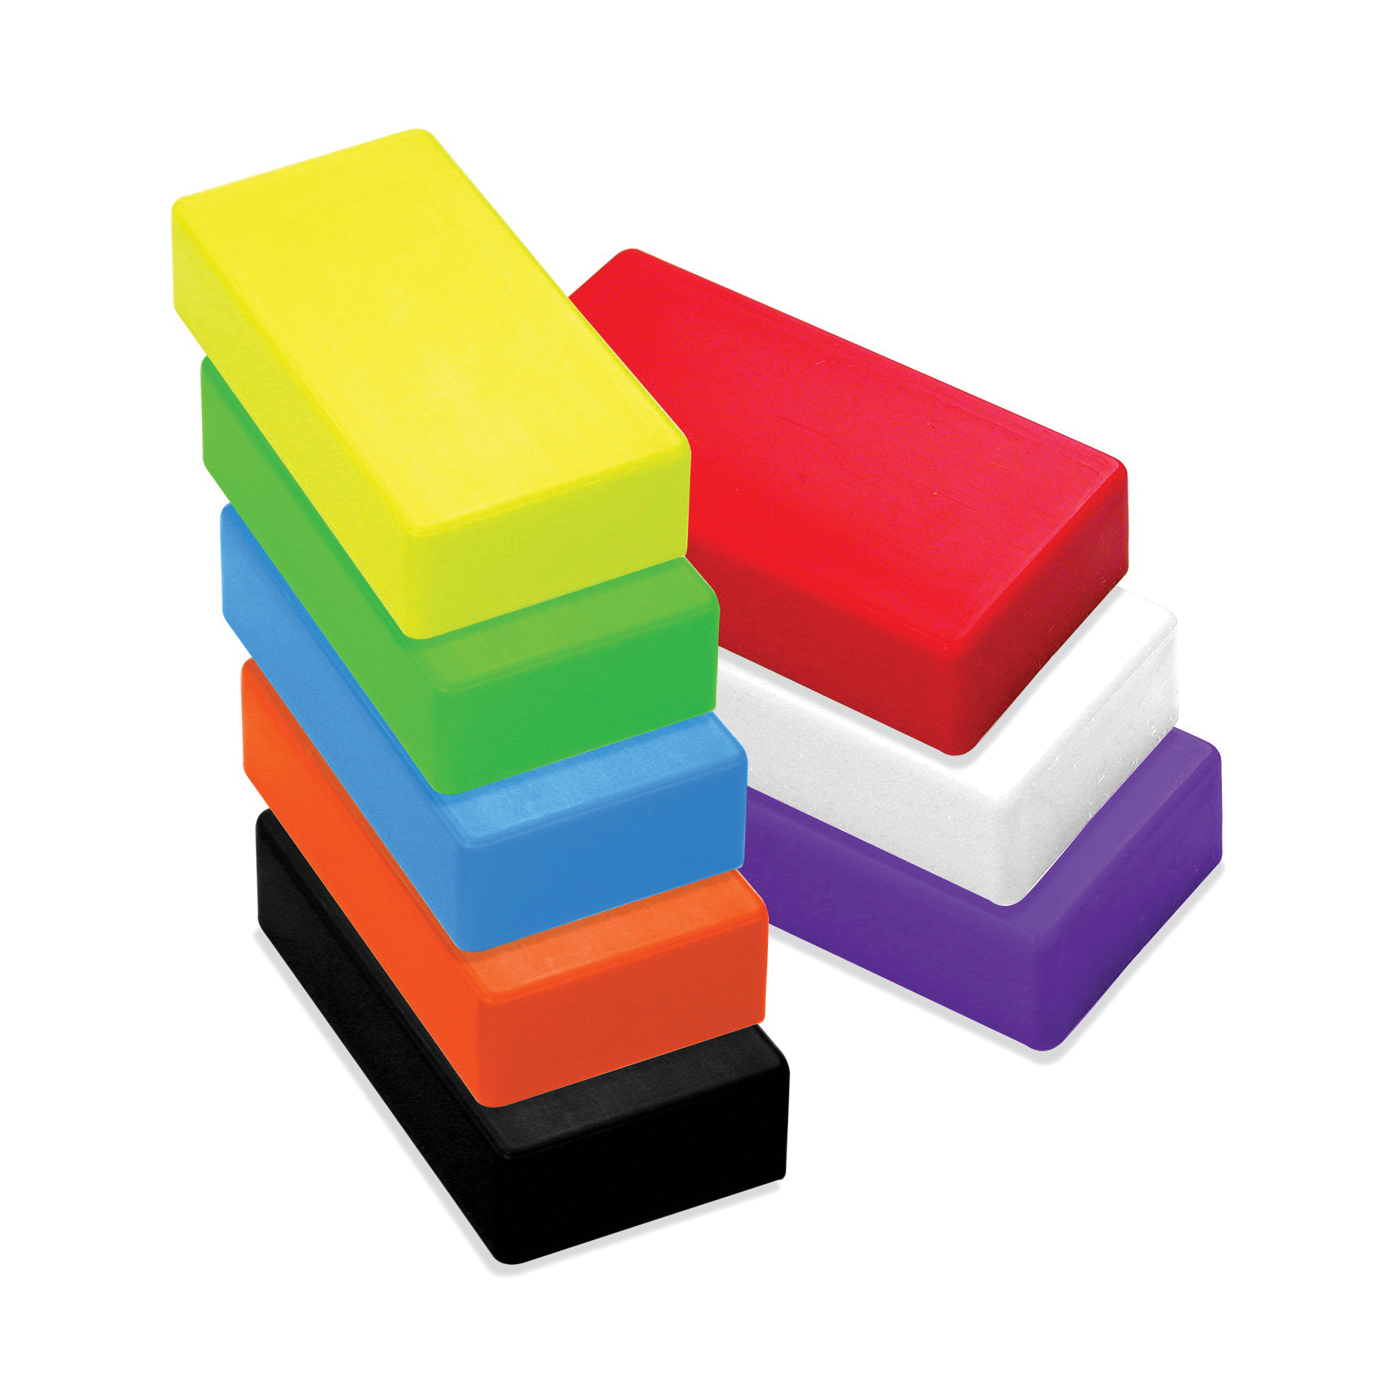 Magnet Source 07278DSP Magnetic Counter Display, Black/Green/Orange/Purple/Red/White/Yellow - 1